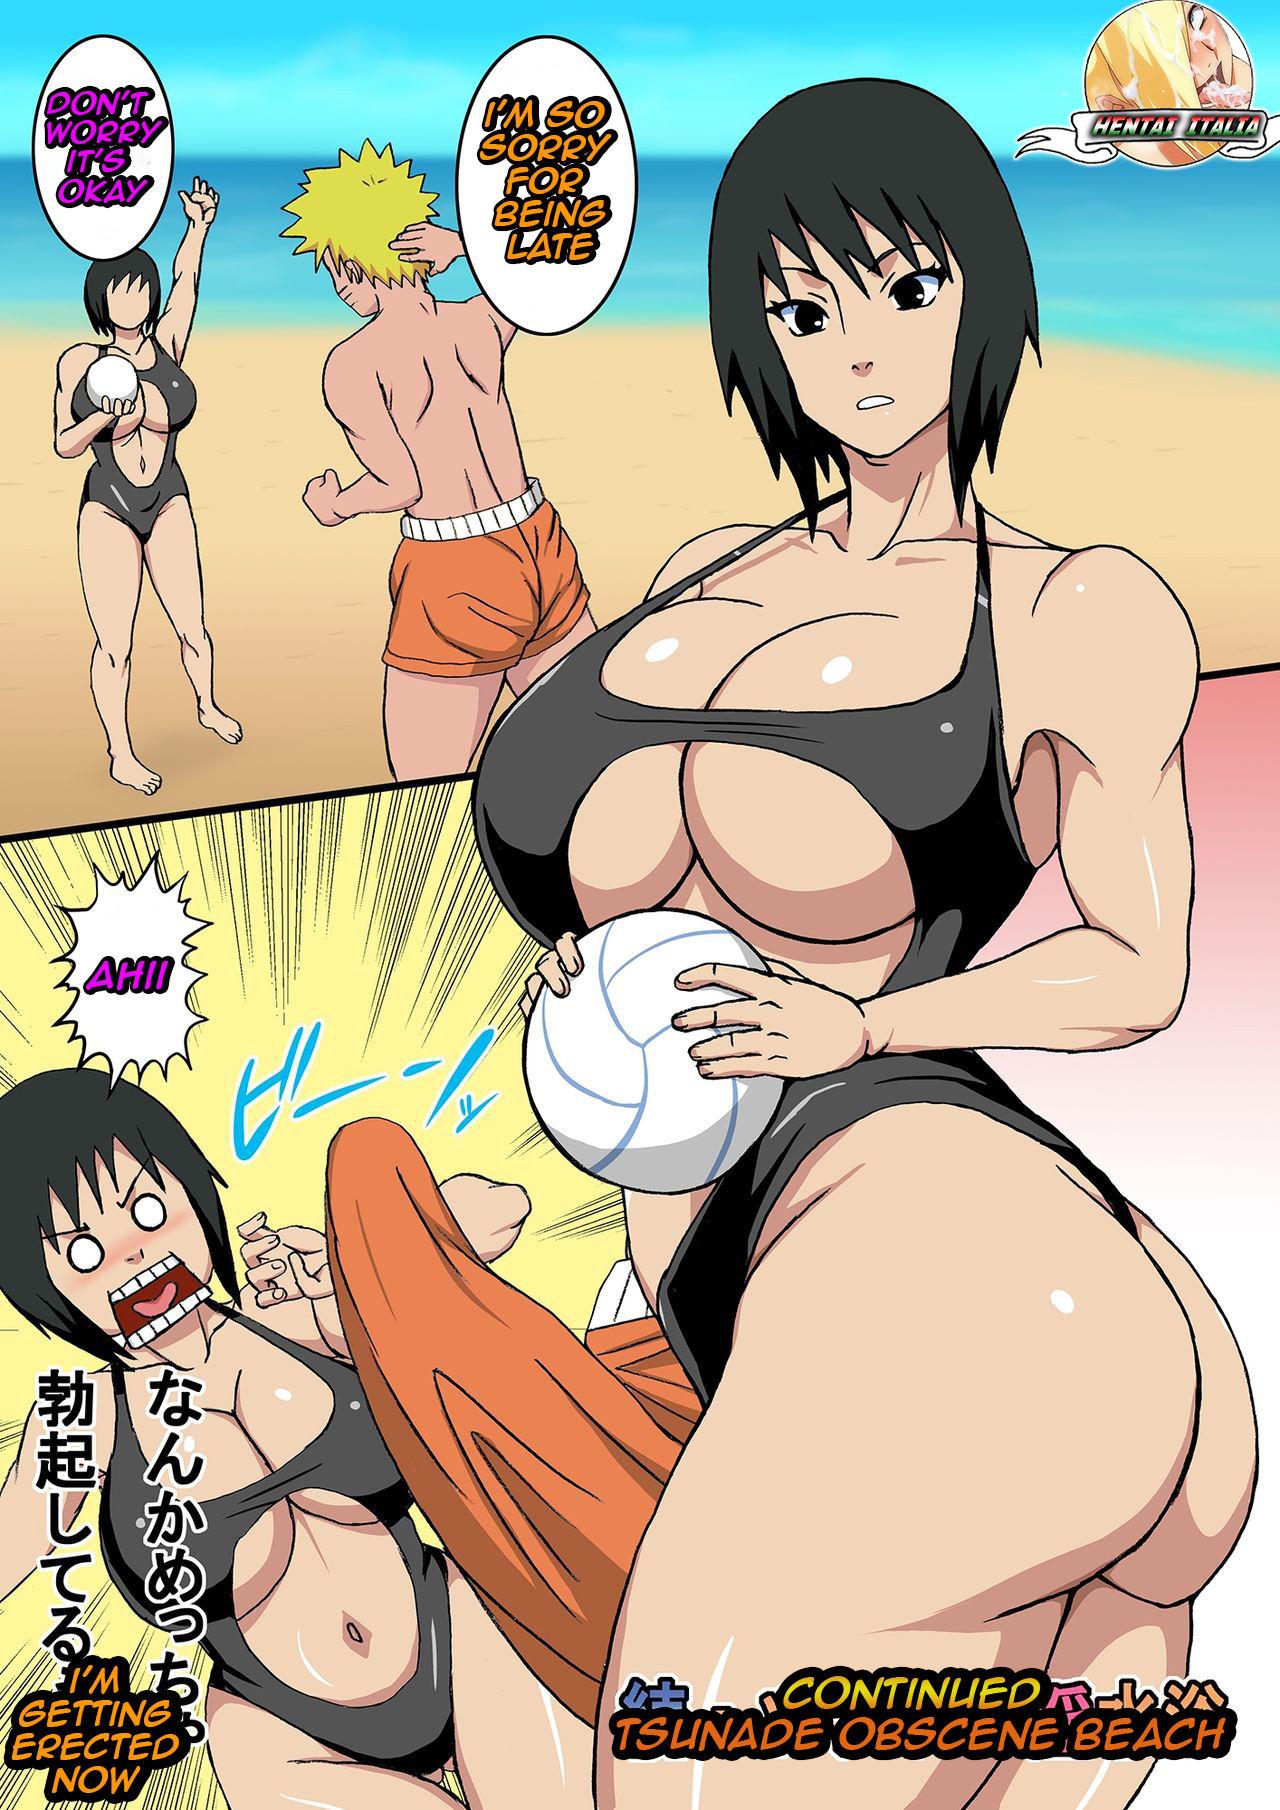 Twinks After Tsunade's Obscene Beach - Naruto Free Blow Job - Page 3